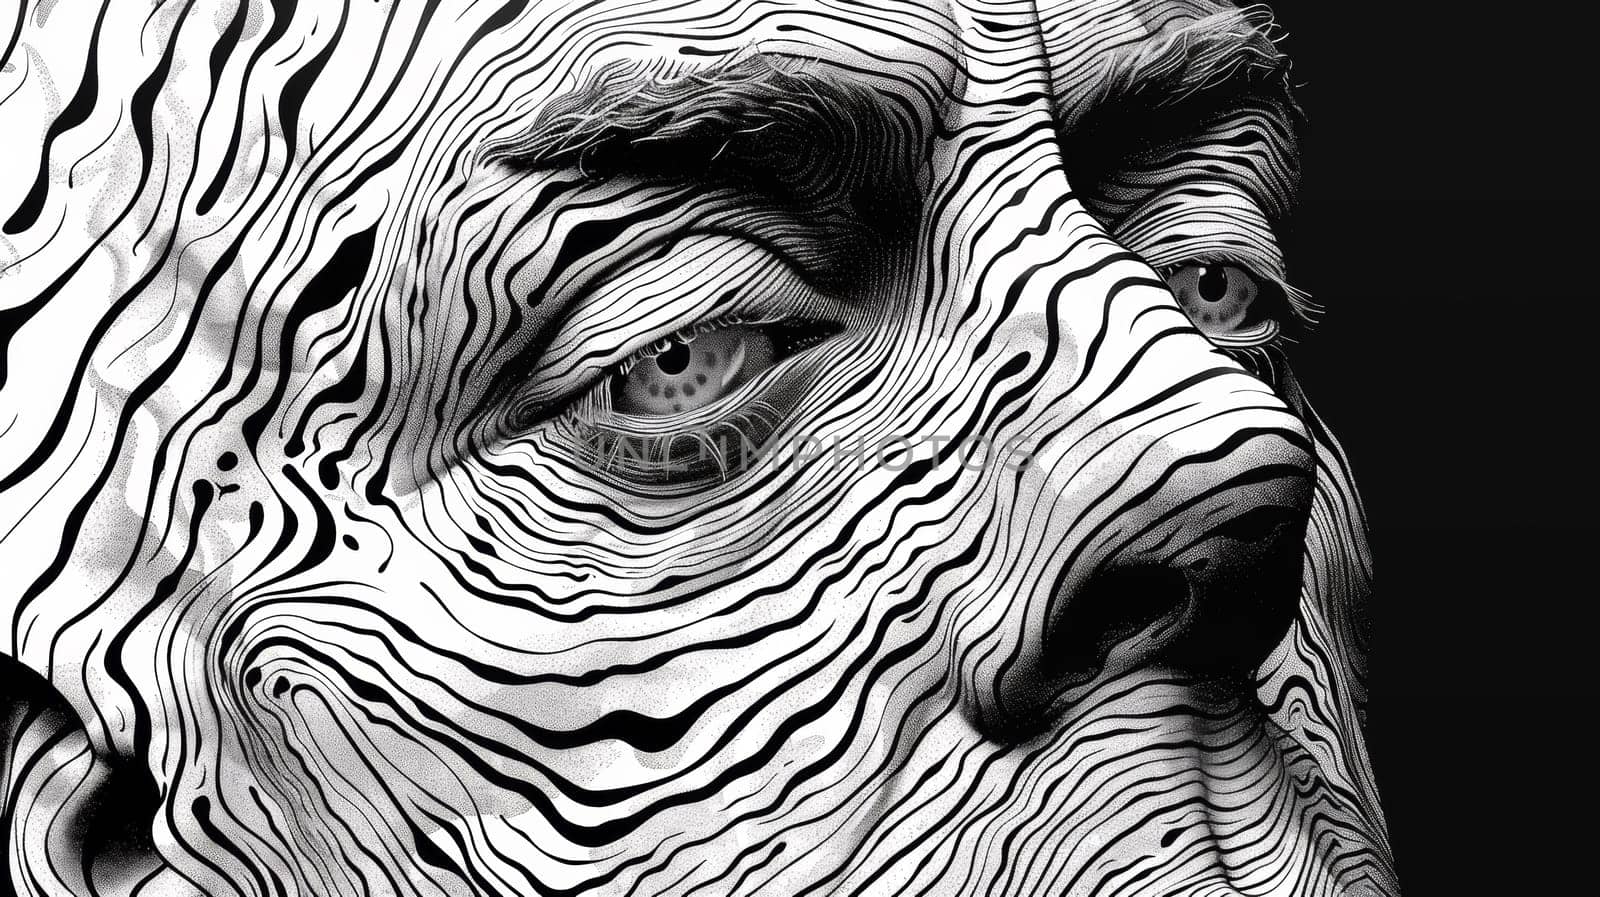 A close up of a man's face with zigzag lines